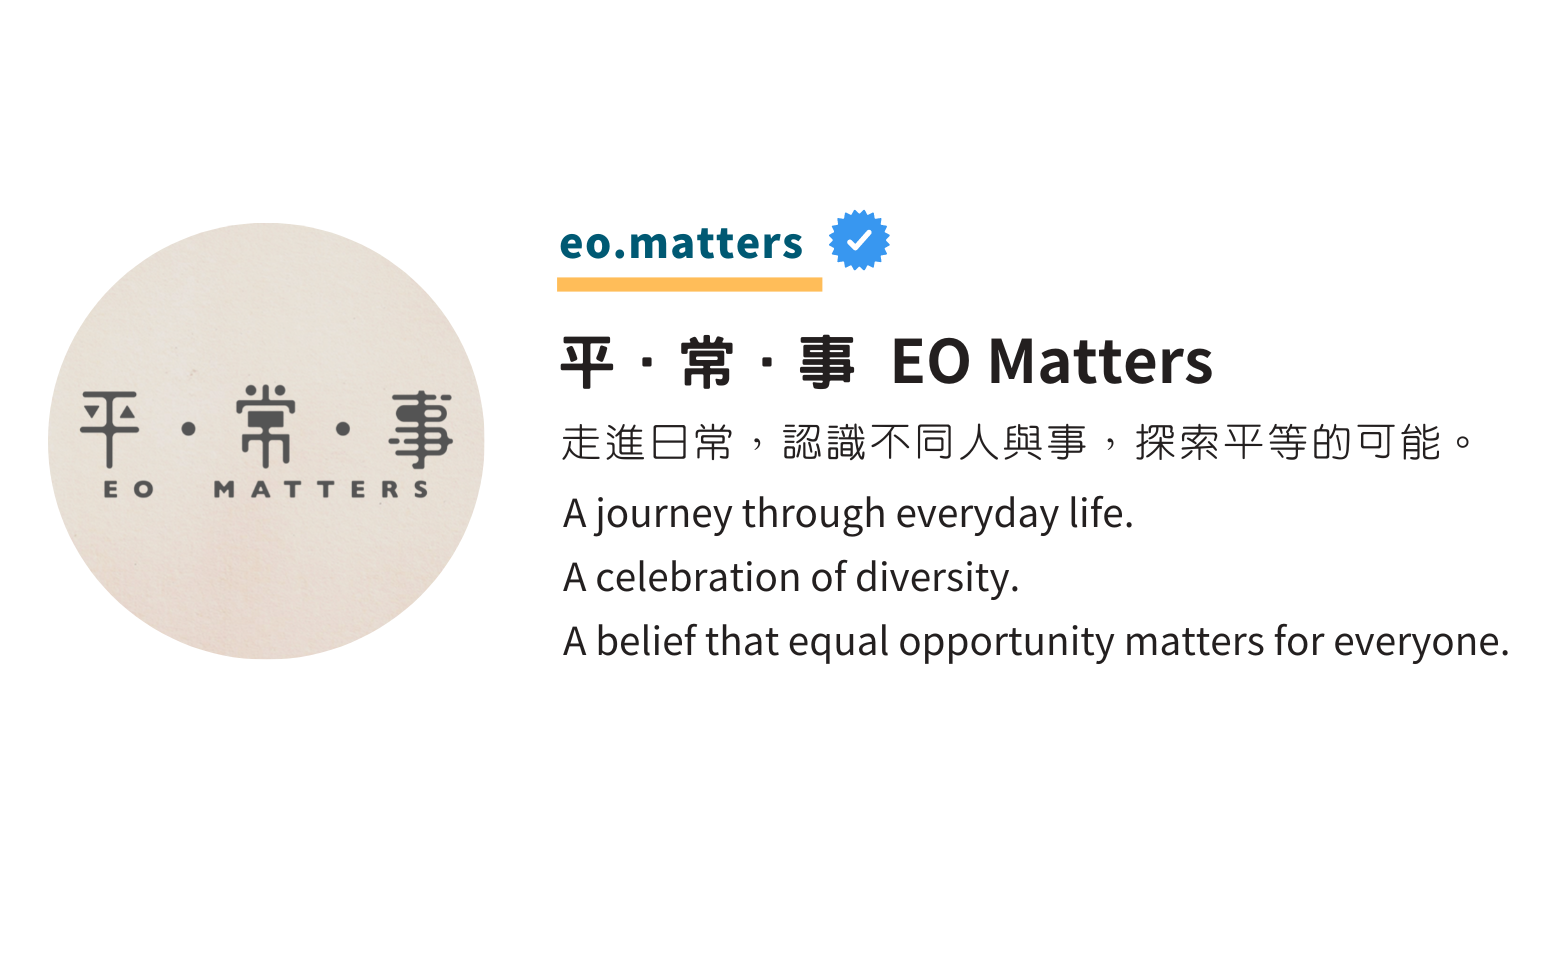 The EOC launched its Instagram profile “EO Matters” in September 2021, and attracted over 8,200 followers in a year.